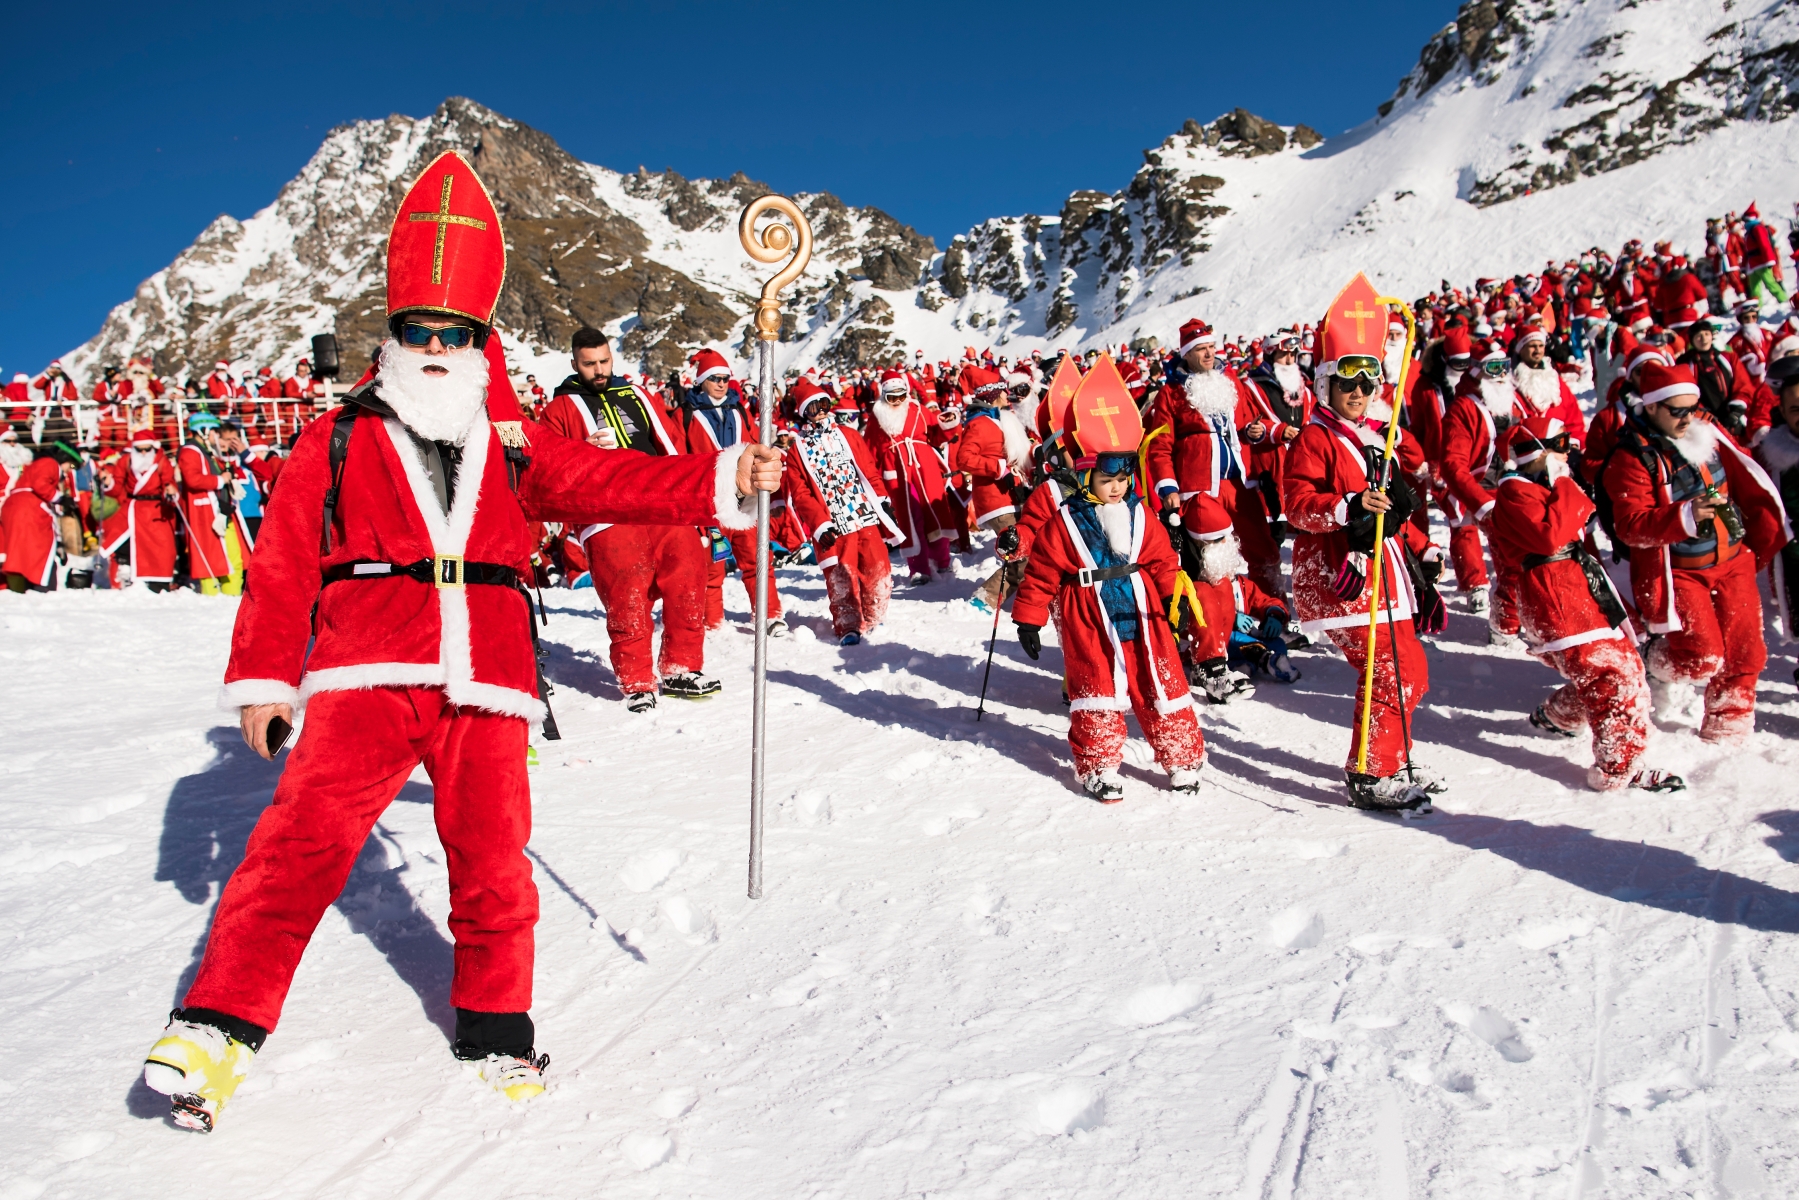 People dressed as Santa Claus, pose for a group picture on the slope during a promotional event on the opening weekend in the alpine ski resort in Verbier, Saturday, December 3, 2016. Around 1200 skiers dressed as Santa Claus were granted free access to the ski resort to celebrates the ski season's opening. (KEYSTONE/Jean-Christophe Bott) SWITZERLAND SKI SANTA CLAUS